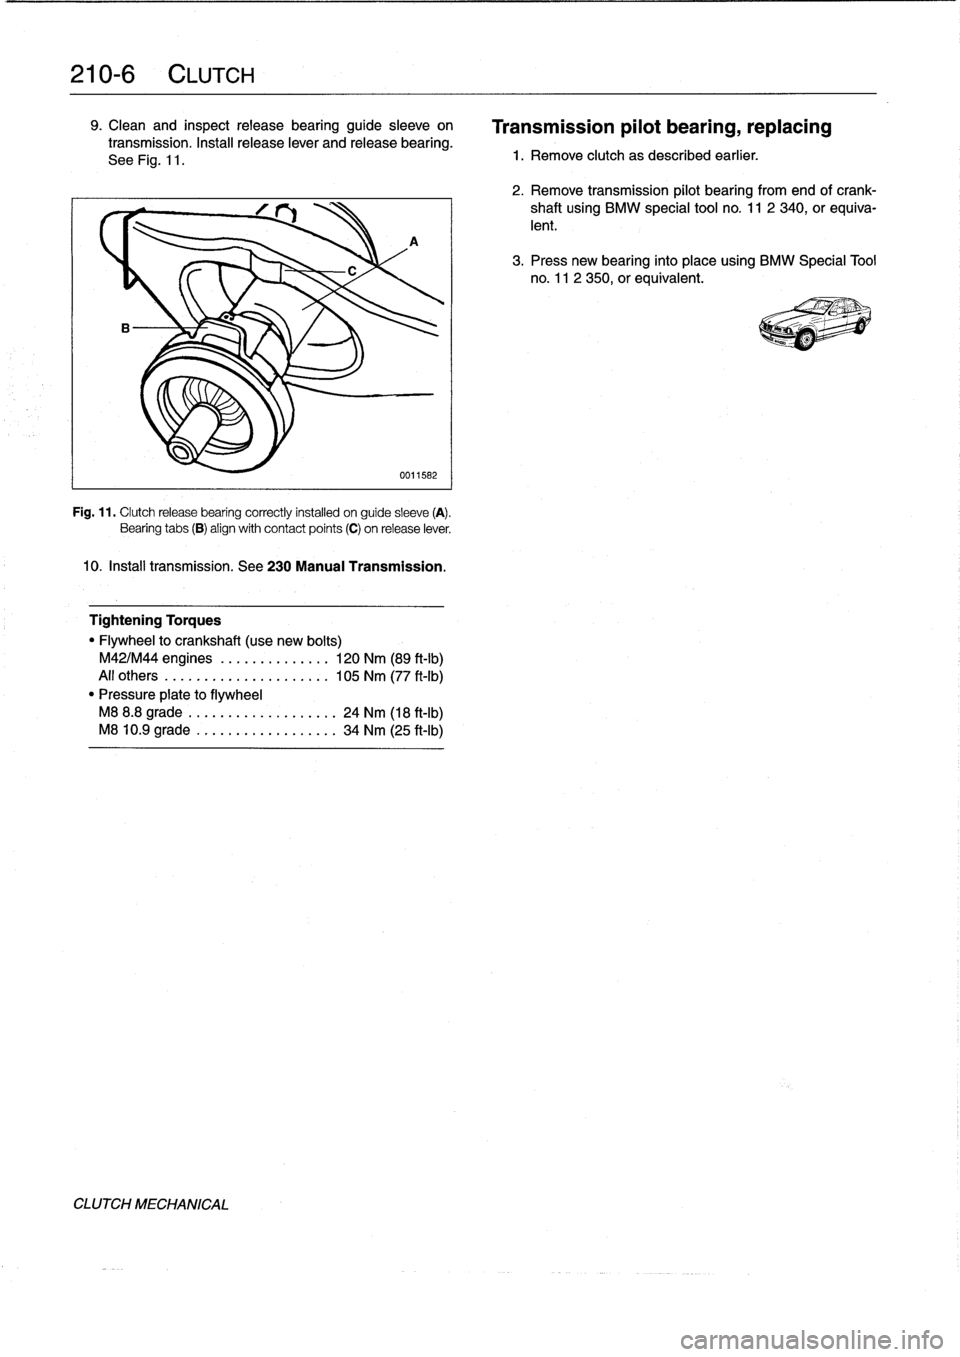 BMW 318i 1997 E36 User Guide 
210-
6
CLUTCH

9
.
Clean
and
inspectrelease
bearing
guide
sleeve
on

transmission
.
Install
release
lever
and
release
bearing
.

See
Fig
.
11
.

A

0011582

Fig
.
11
.
Clutchrelease
bearing
correctly